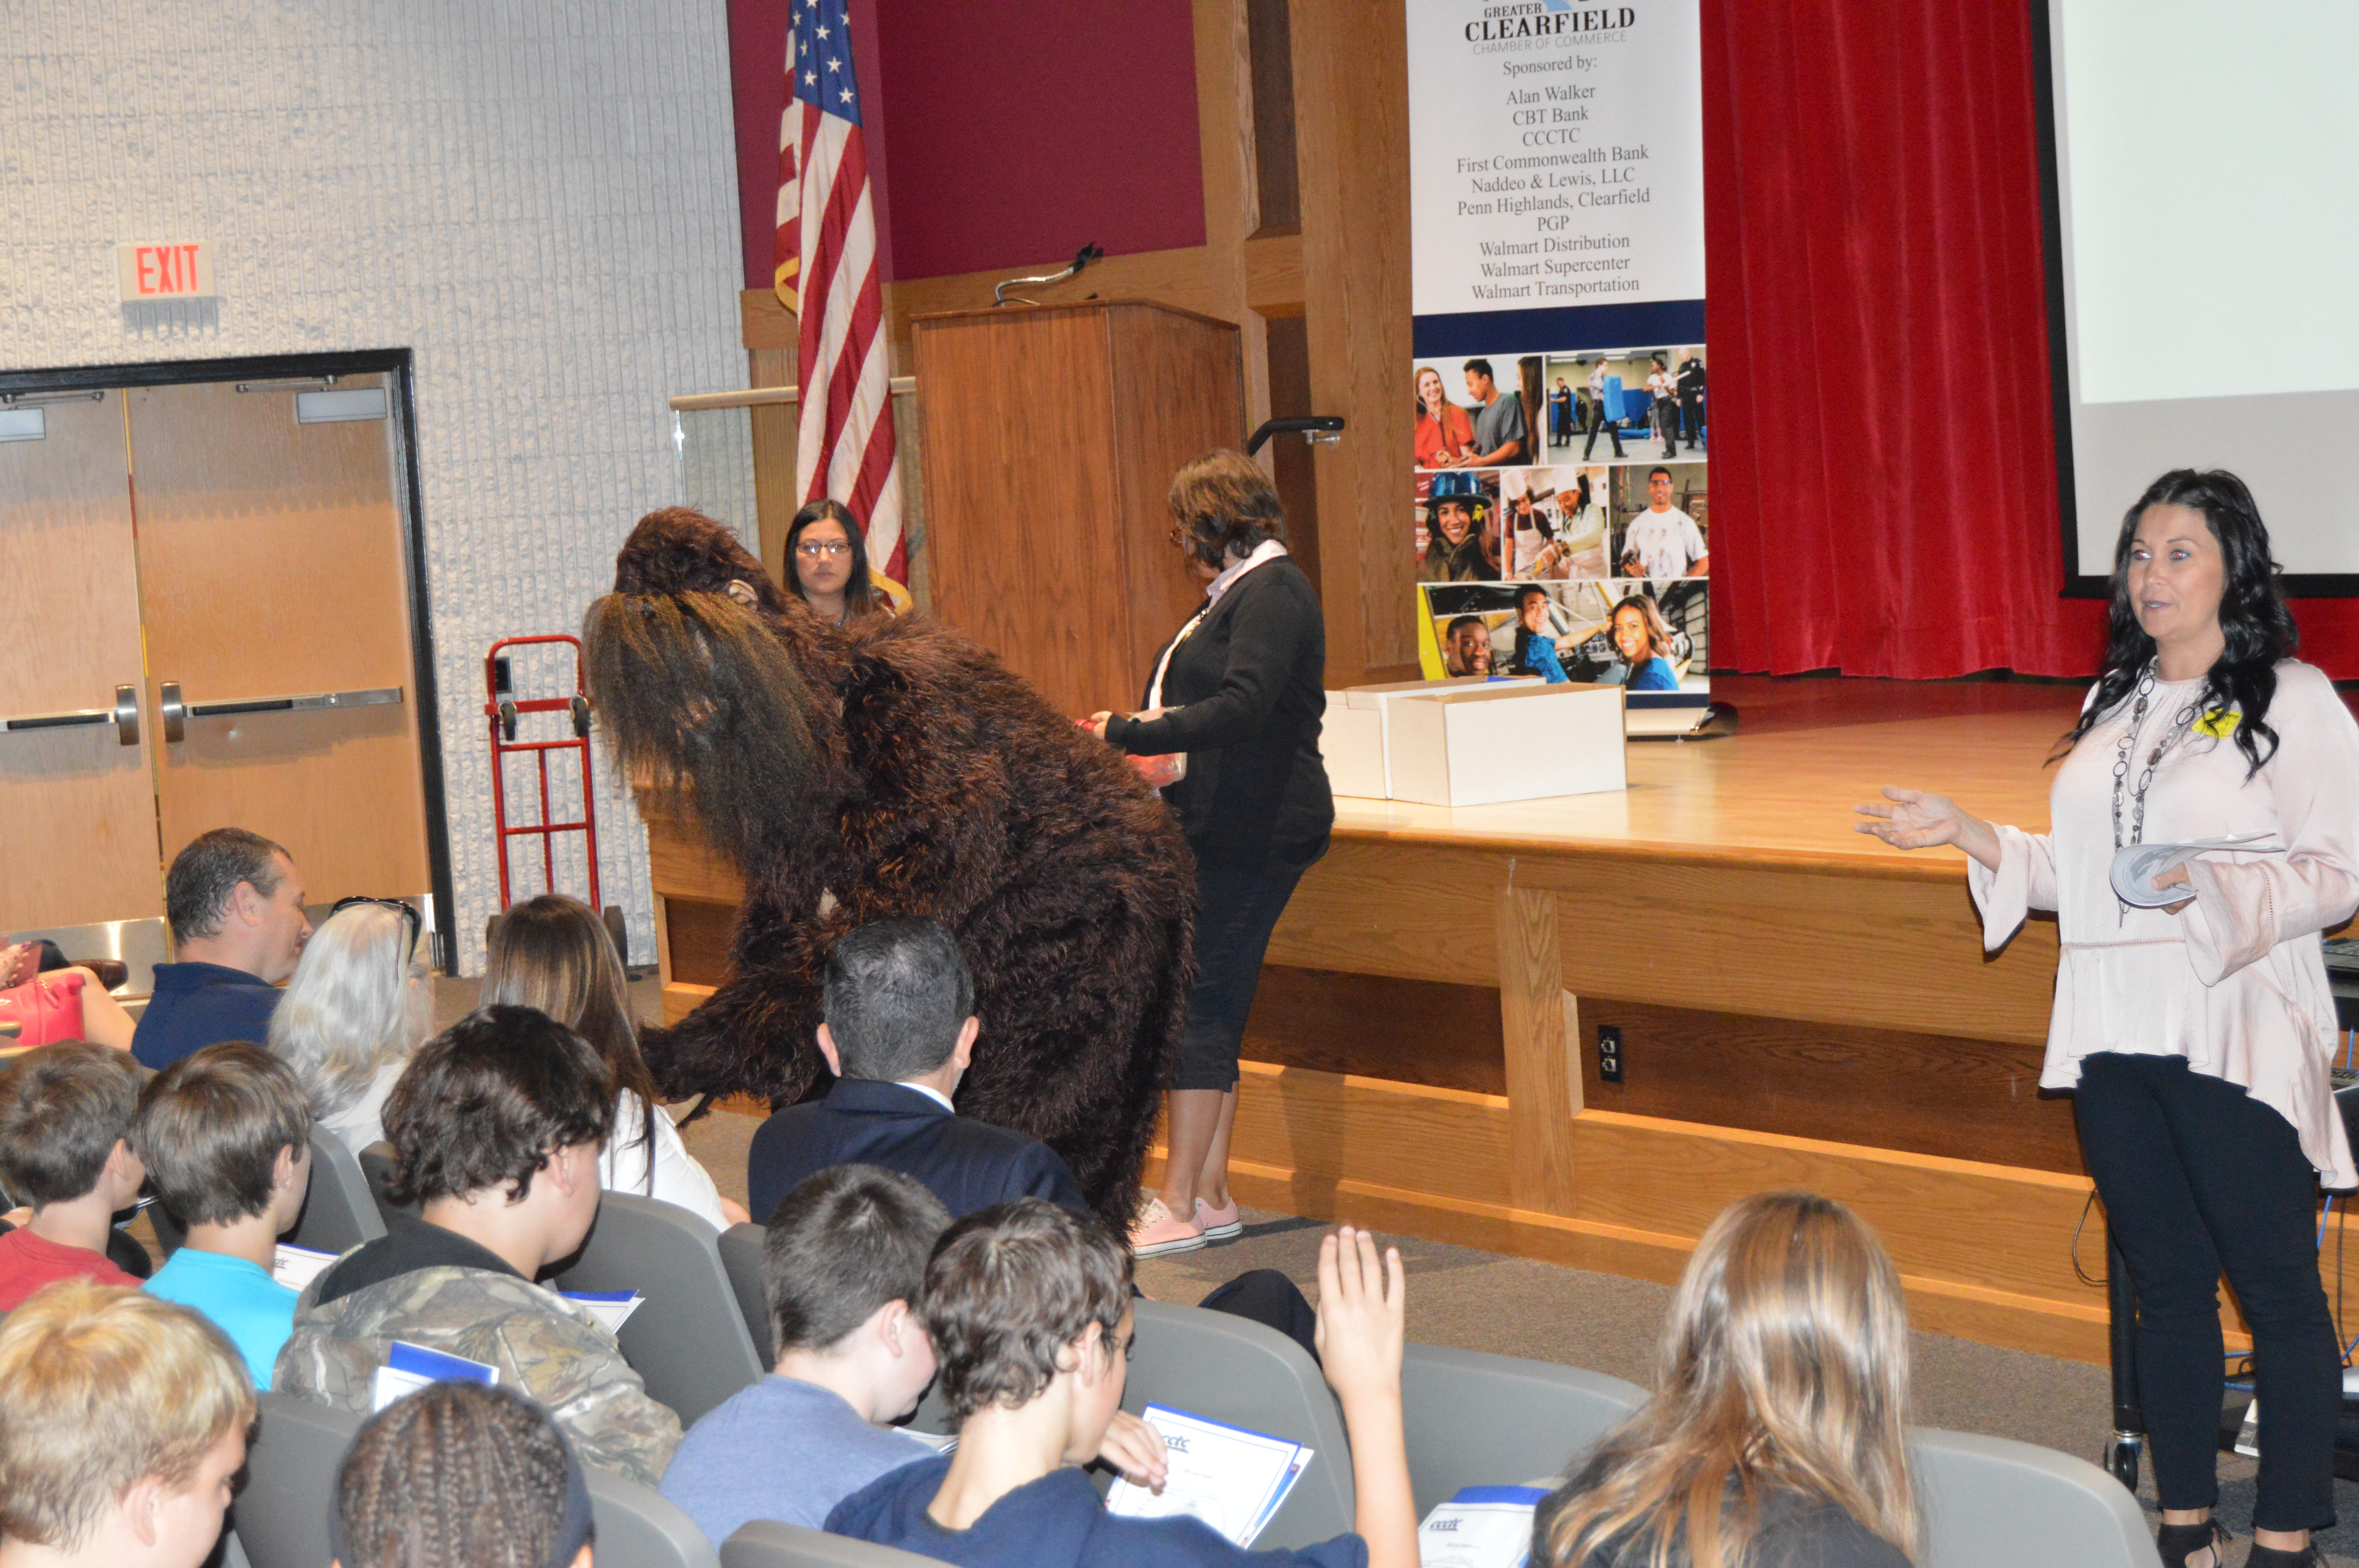 "Sasquatch," the mascot of the Clearfield County Career & Technology Center, greets eighth grade students at the Clearfield Area Junior-Senior High School. 
The Sasquatch was on hand as part of the Exploring program held Monday at the school. 
The program, being held by the Greater Clearfield Chamber of Commerce and various local business partners, is designed to help the students learn about careers right here in the Clearfield area. 
(Photo by Kimberly Finnigan)